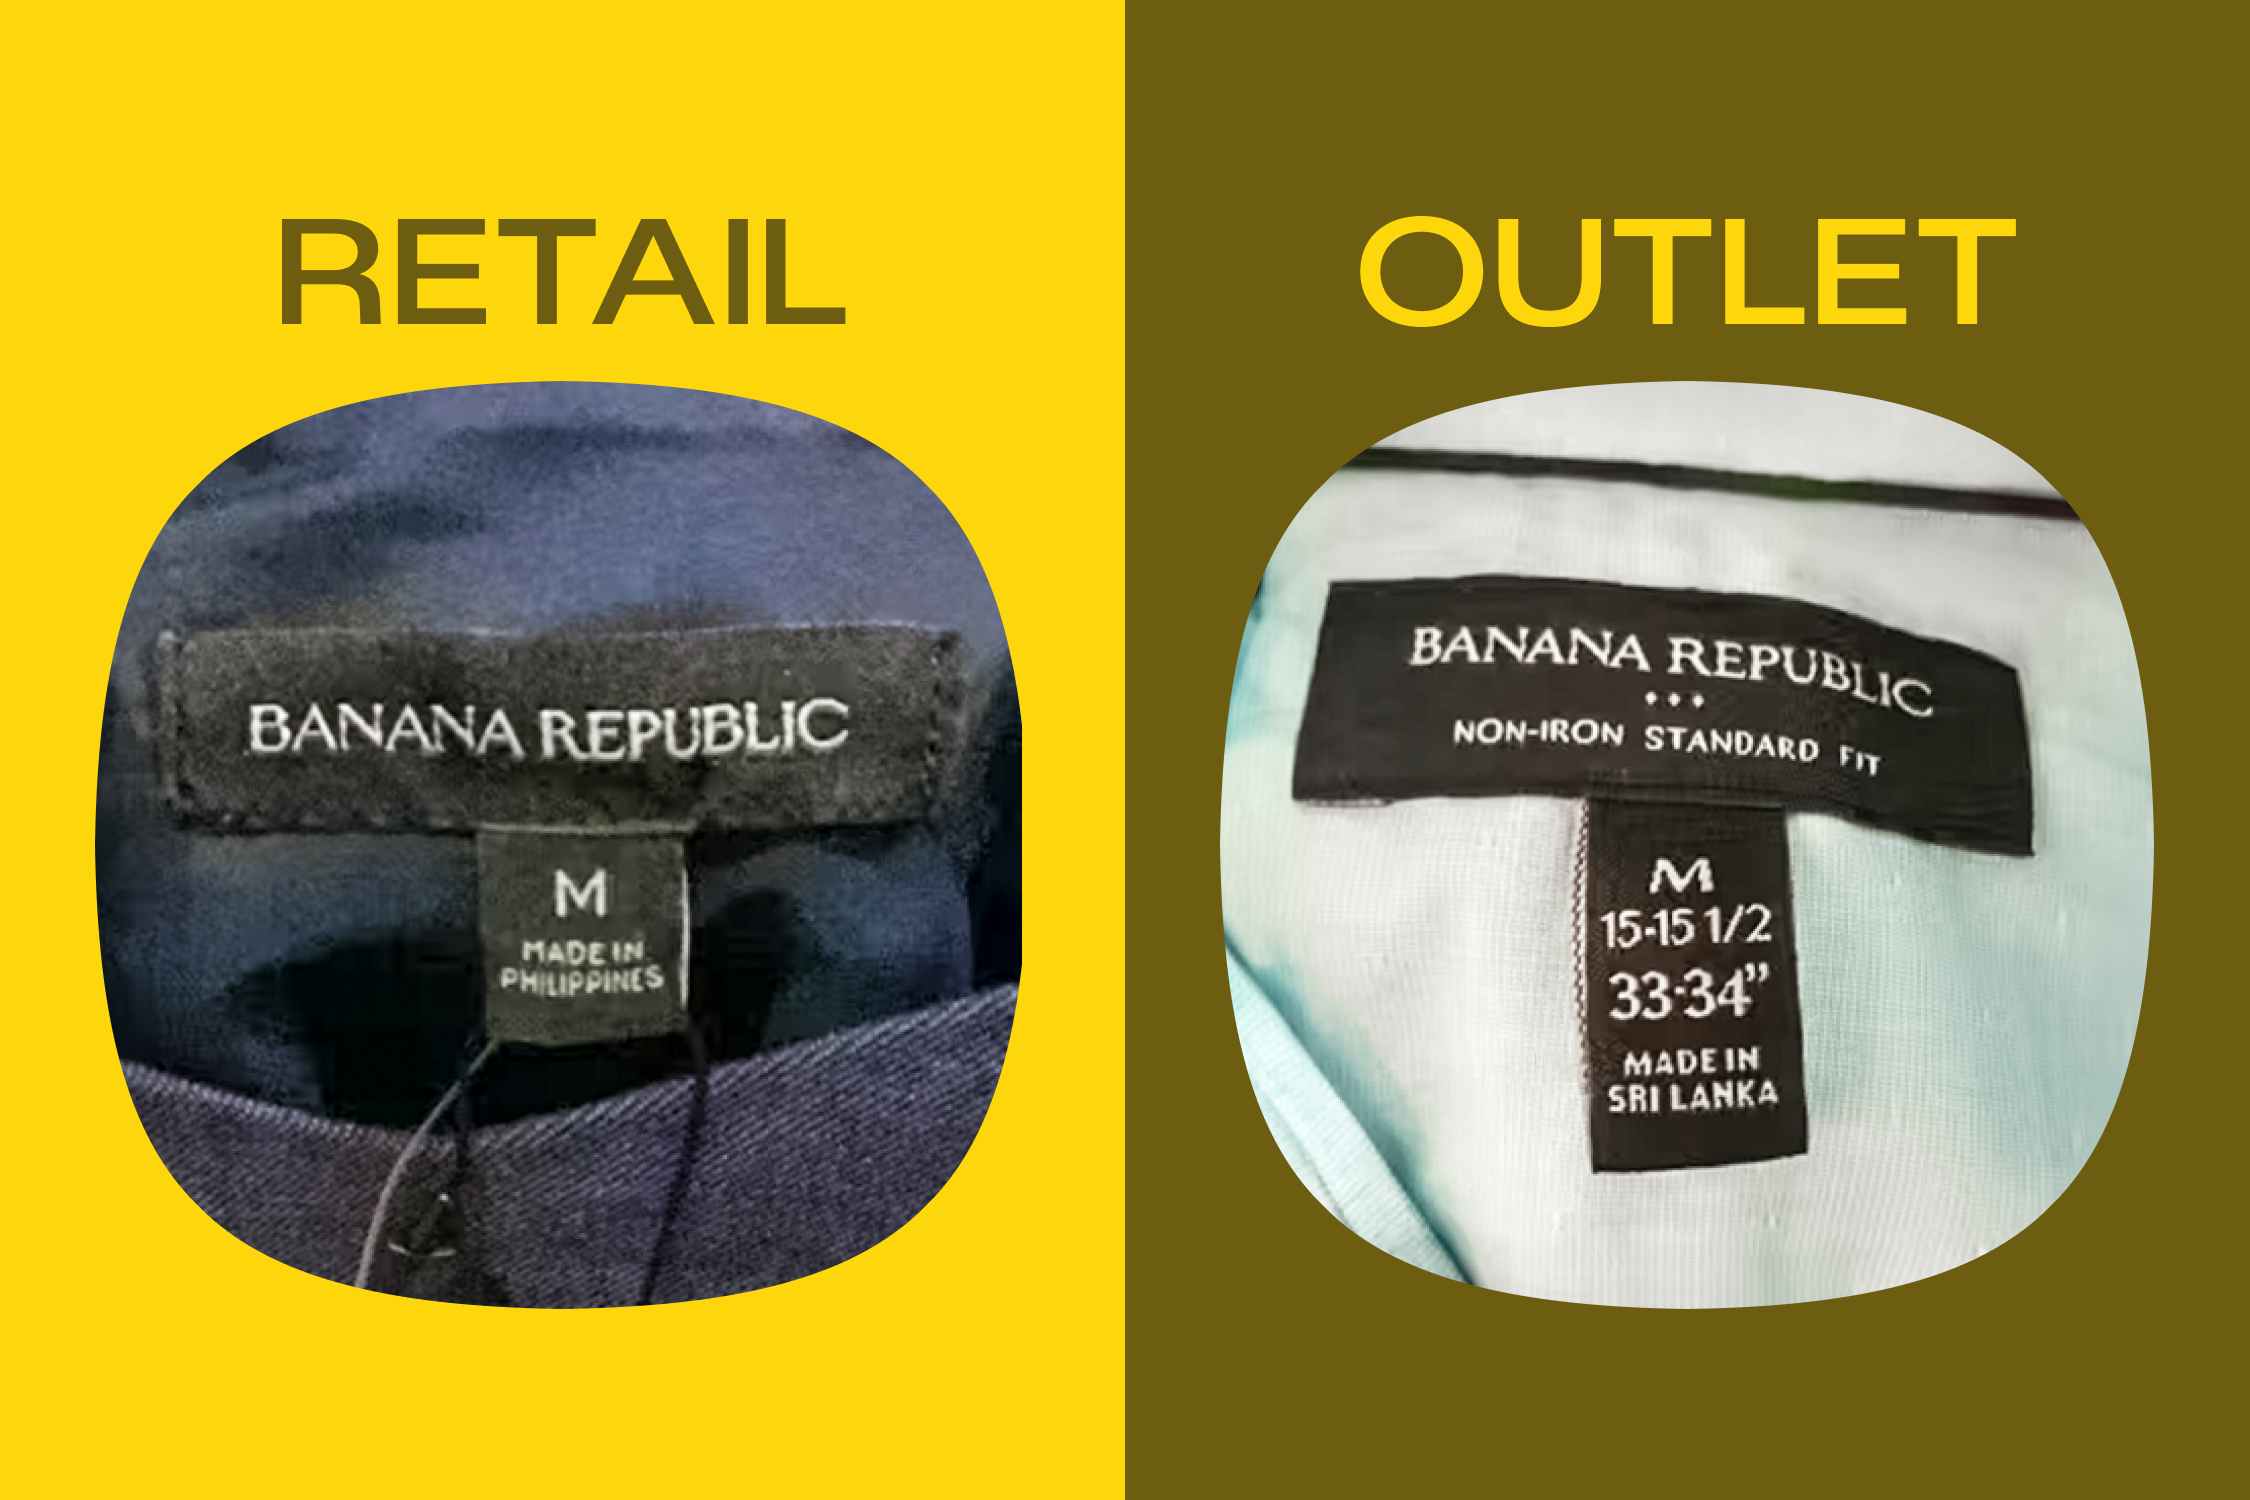 an example of a retail and outlet version of Banana Republic items